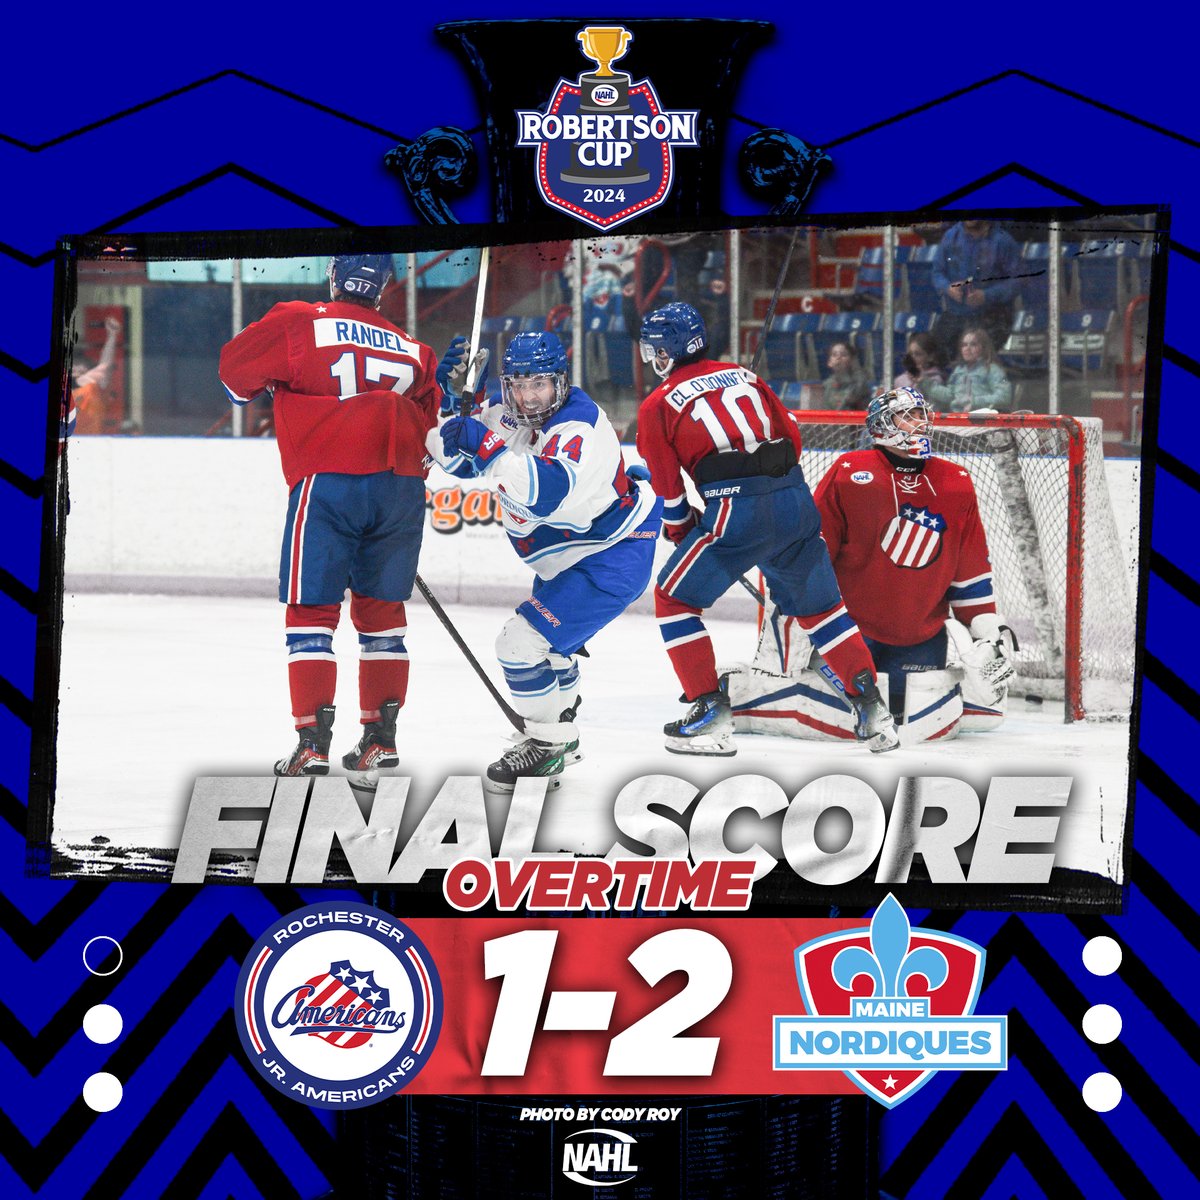 The Nordiques advance in dramatic fashion! (📸 Cody Roy) #RobertsonCup